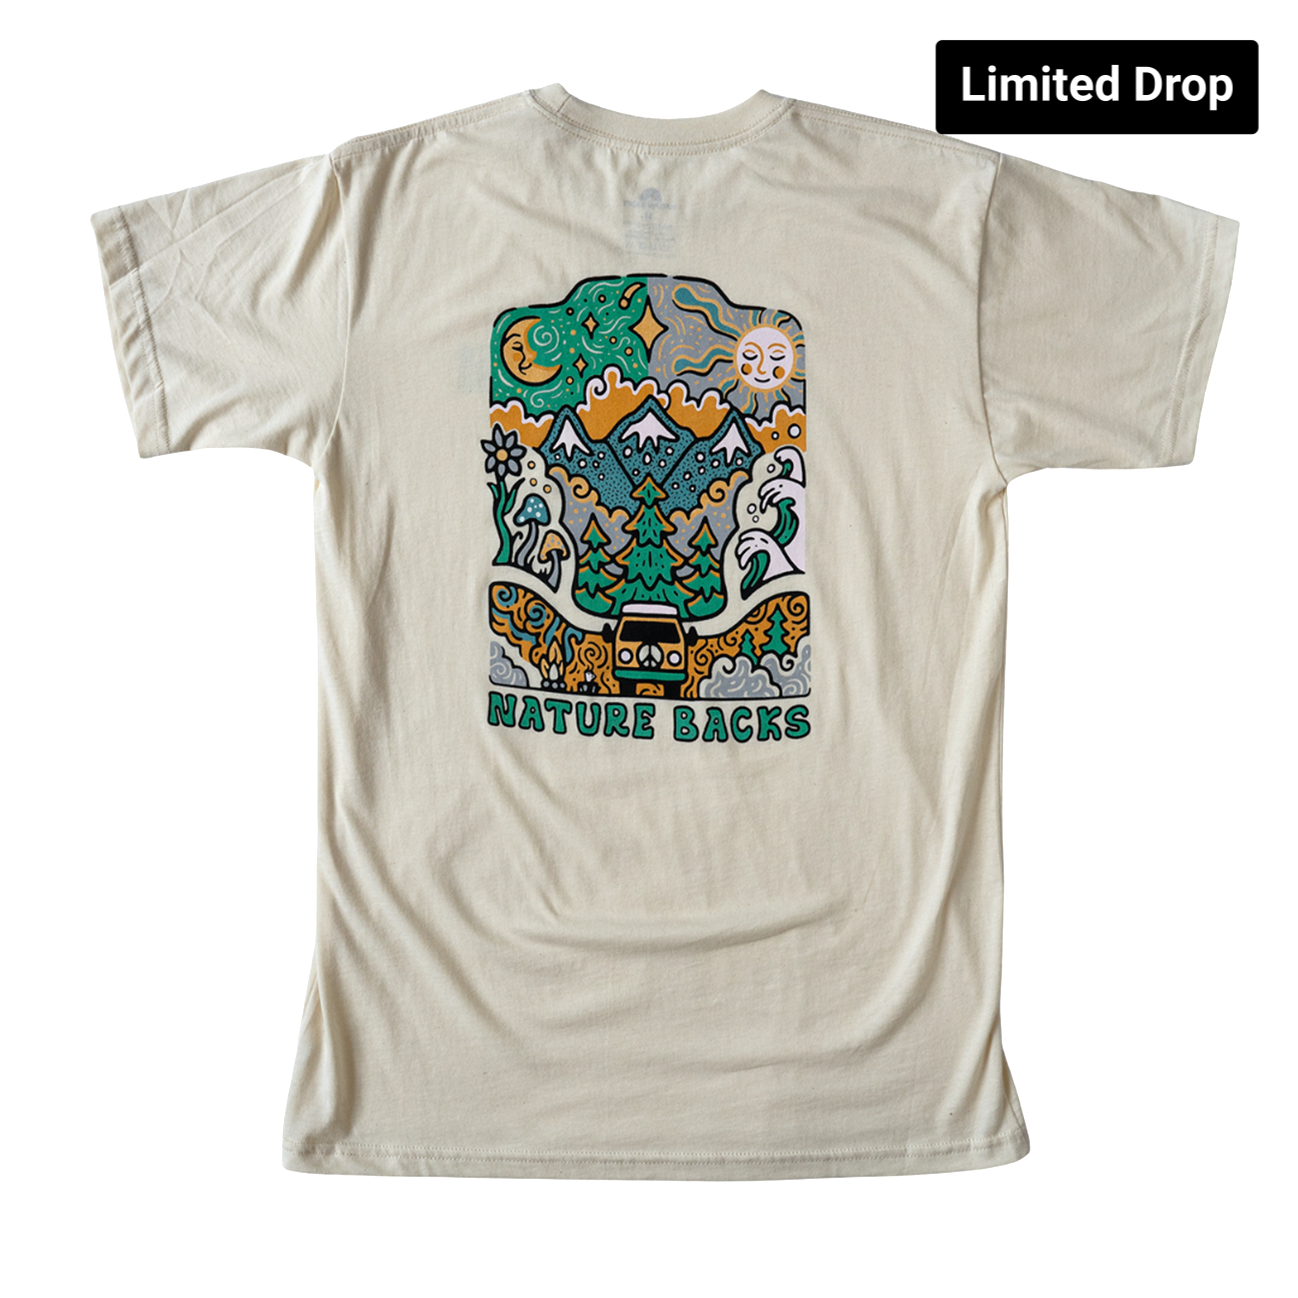 Nature Backs Limited Edition Short Sleeve 100% Organic Cotton T-Shirt | Limited Wander Natural Short Sleeve made with Eco-Friendly Fibers Sustainably made in the USA 